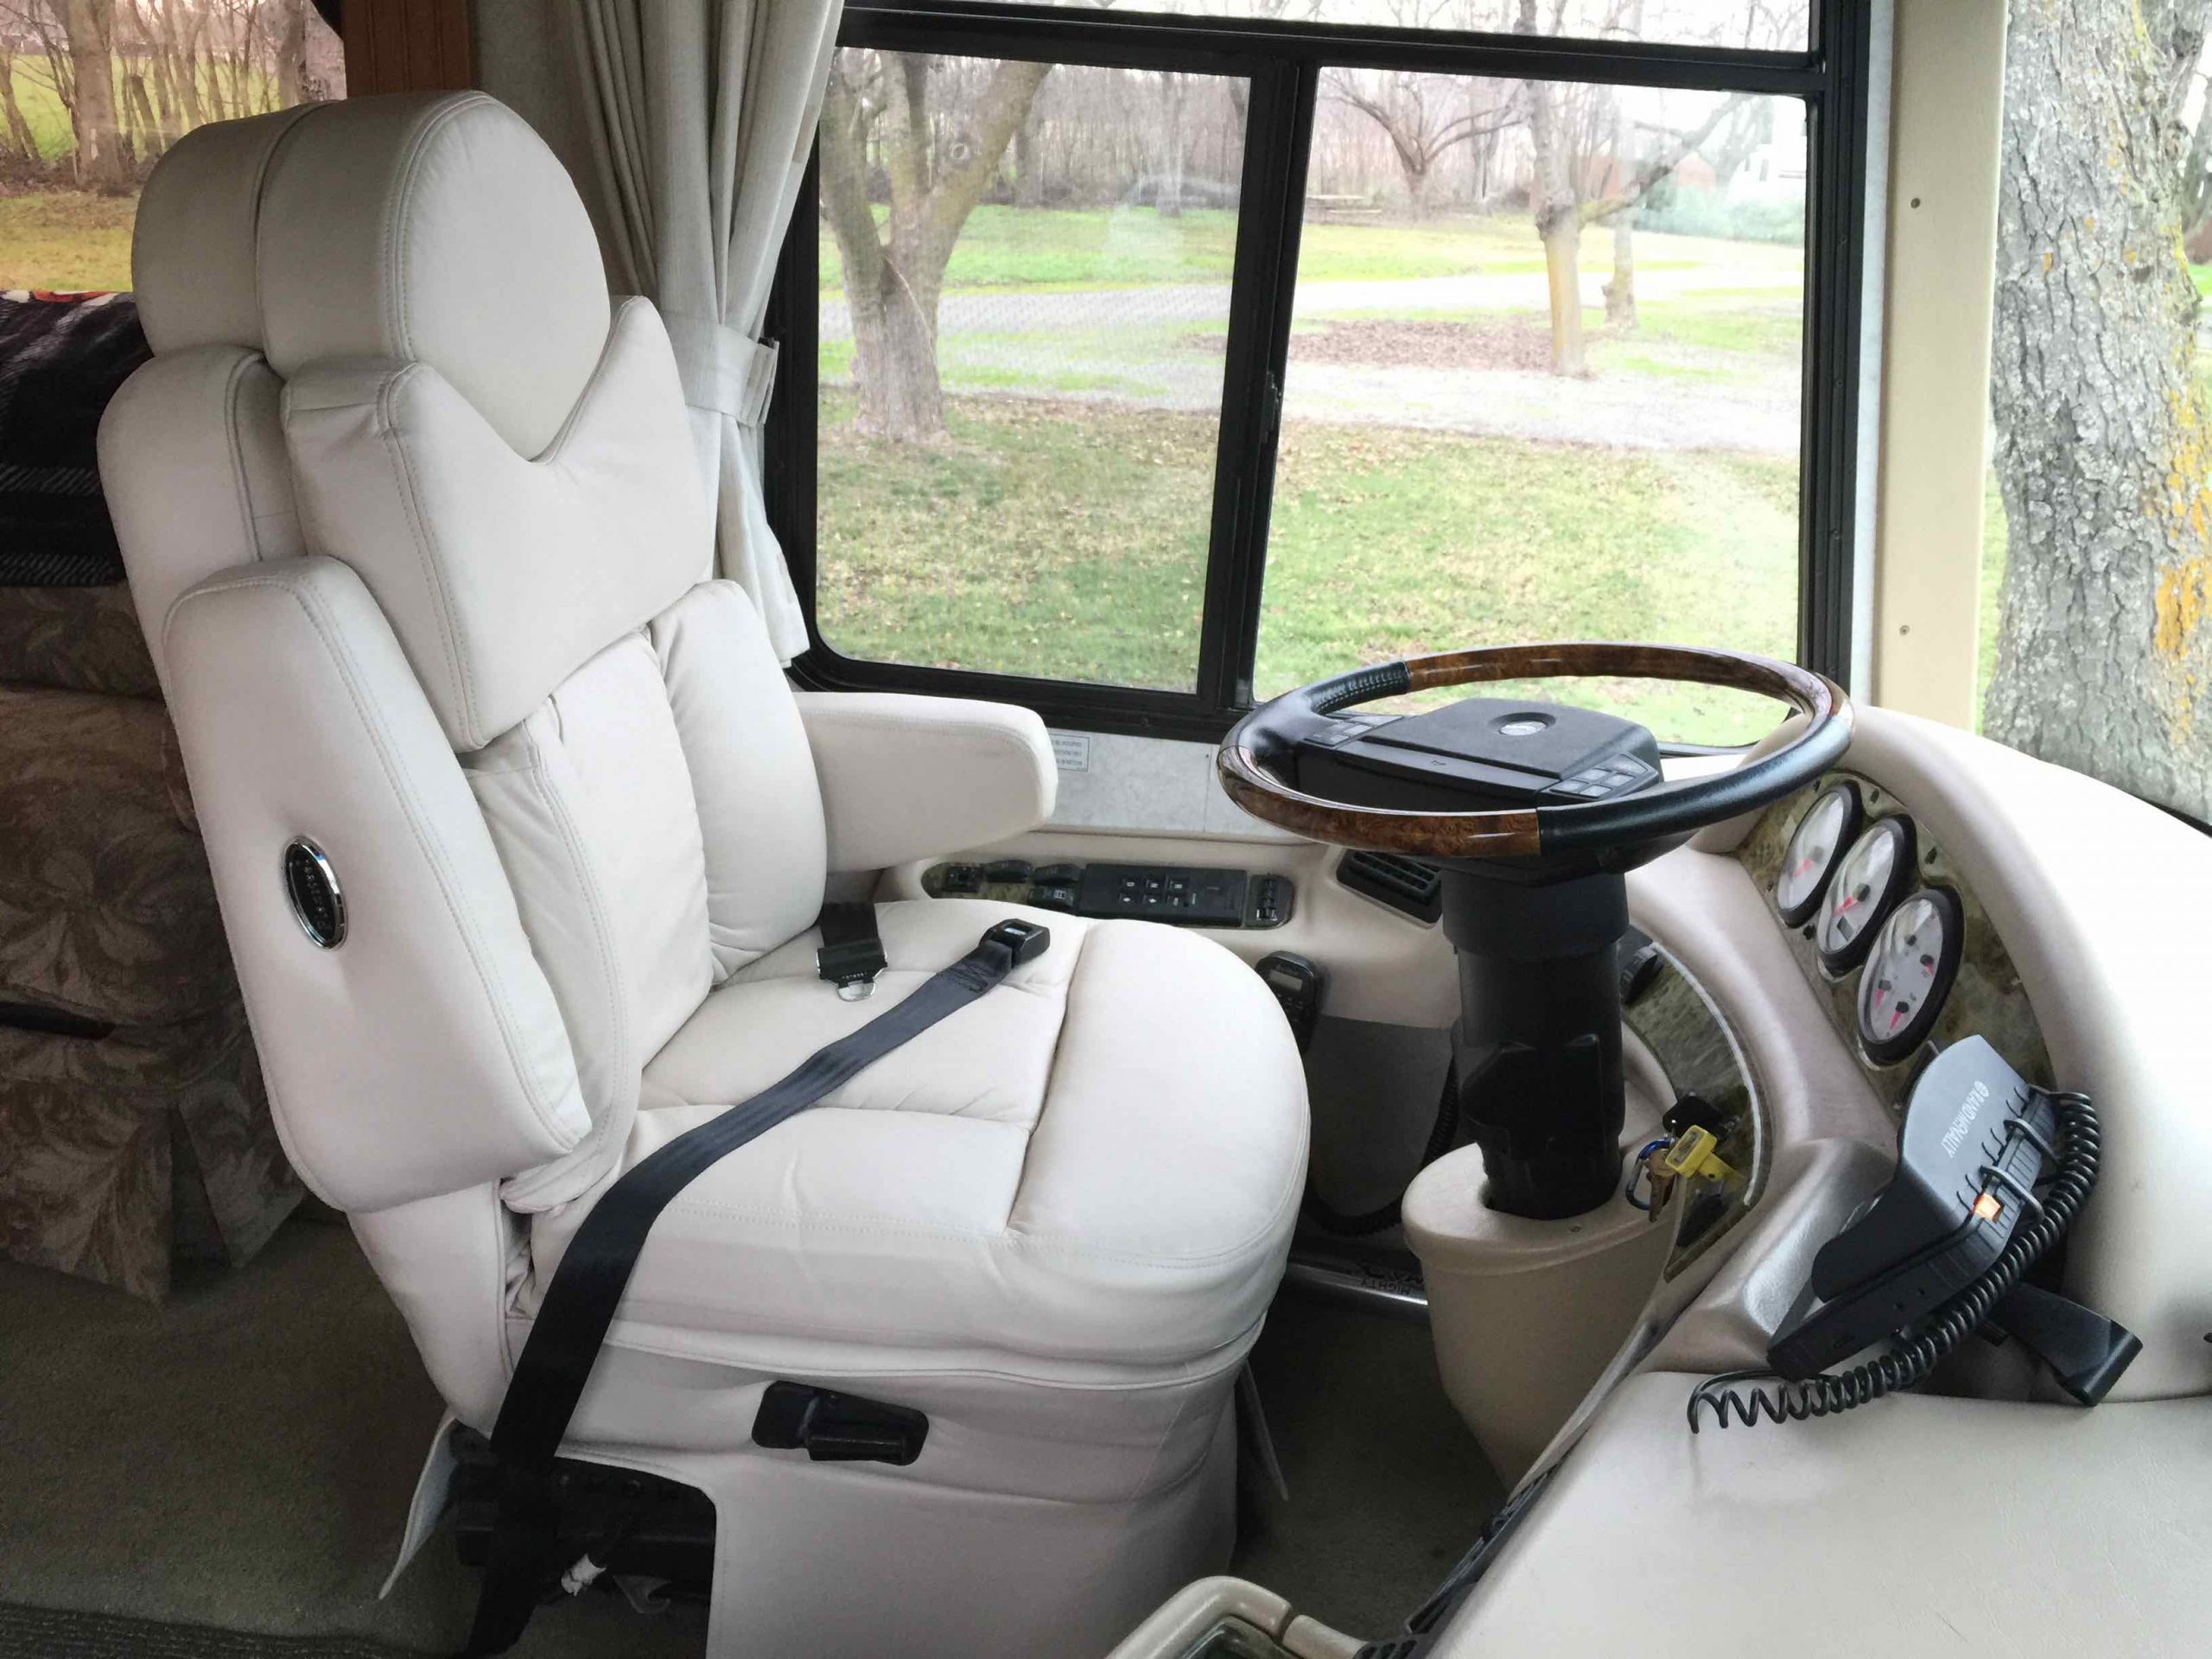 https://blog.goodsam.com/wp-content/uploads/2016/02/RV-Seat-Replacement2-scaled.jpg